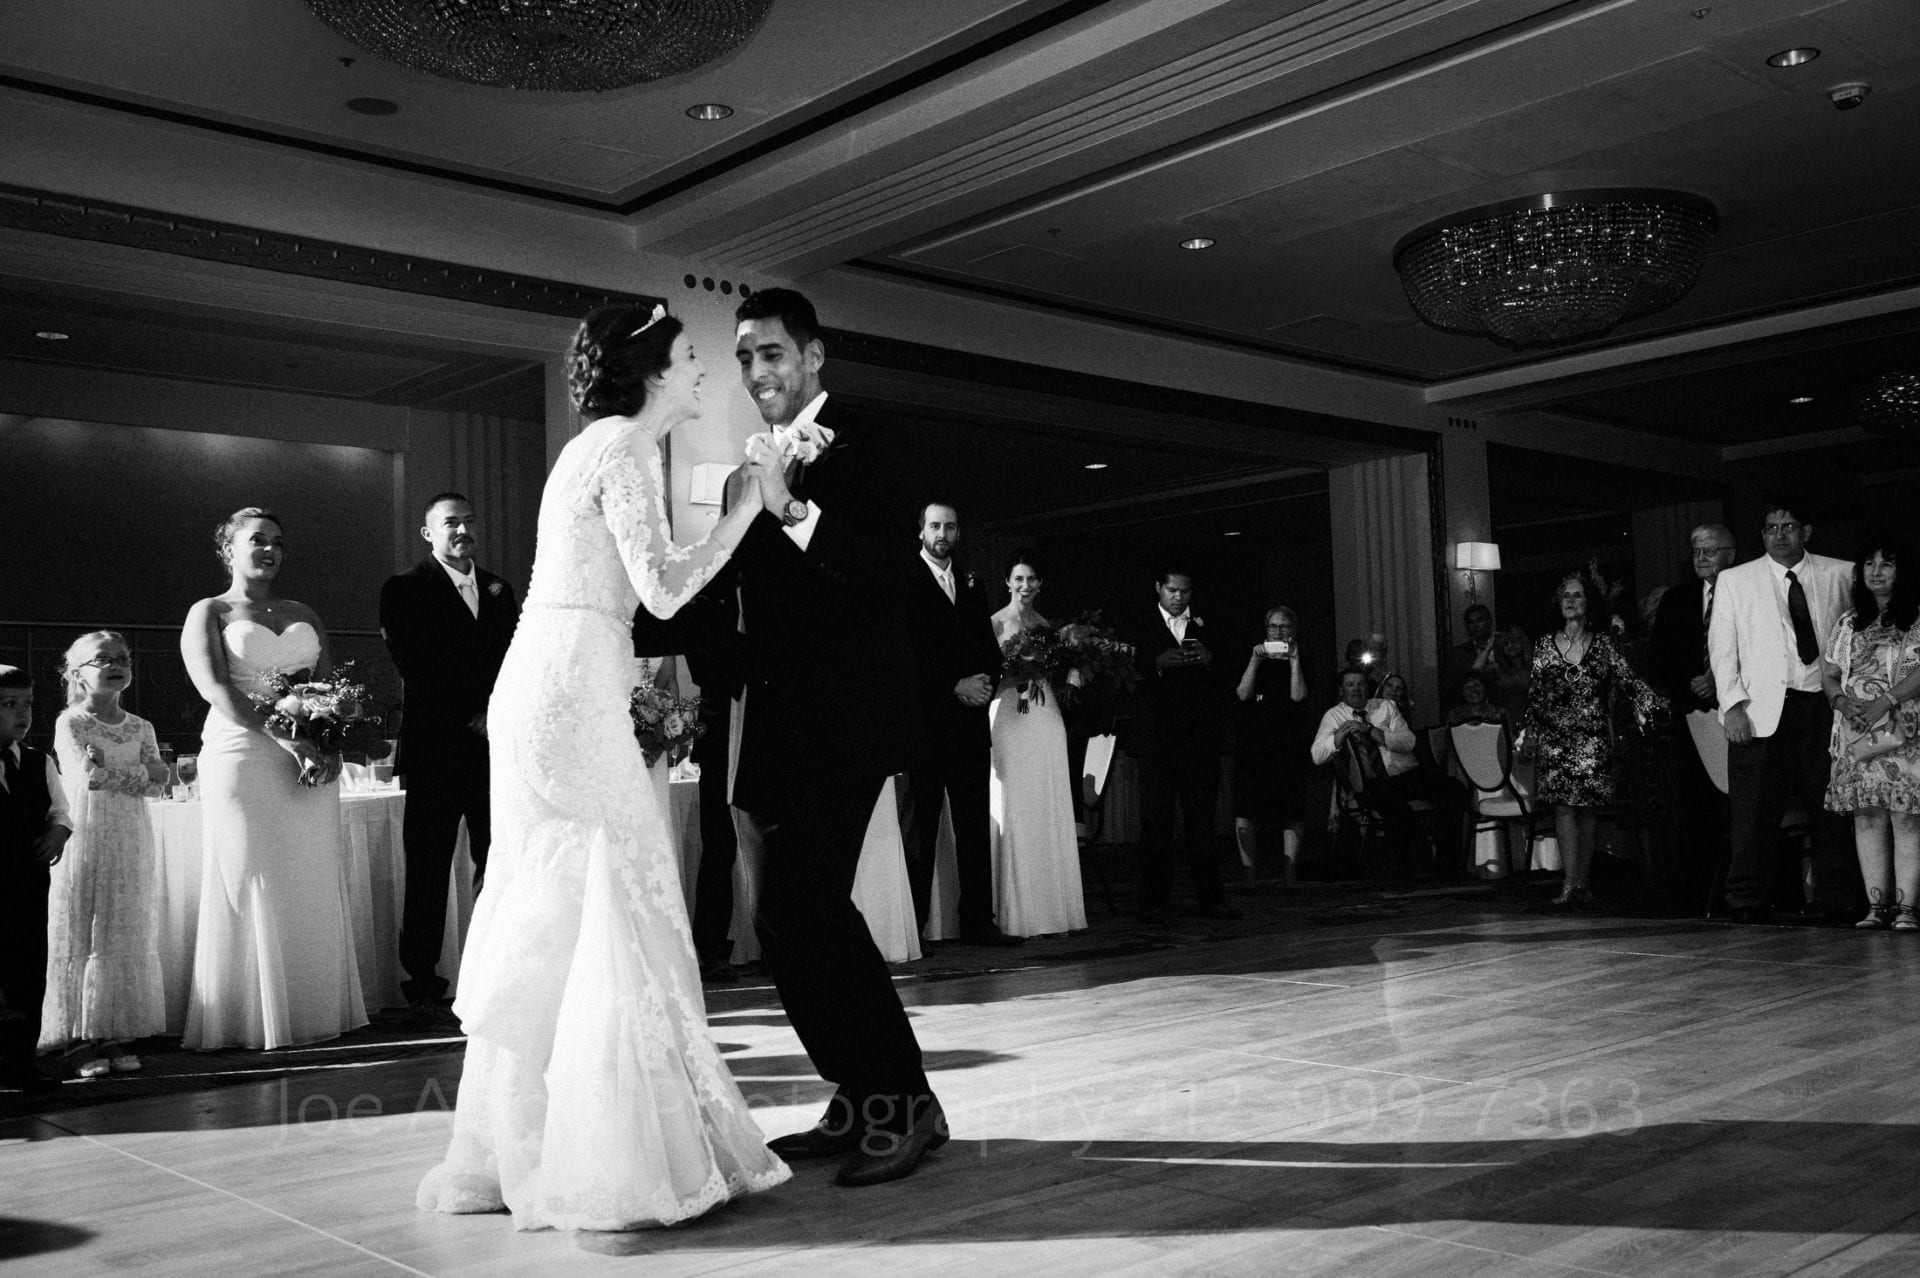 Bride and groom hold on to each other and laugh during their first dance at their William Penn Hotel Wedding in the William Penn ballroom as their wedding party stands to watch.